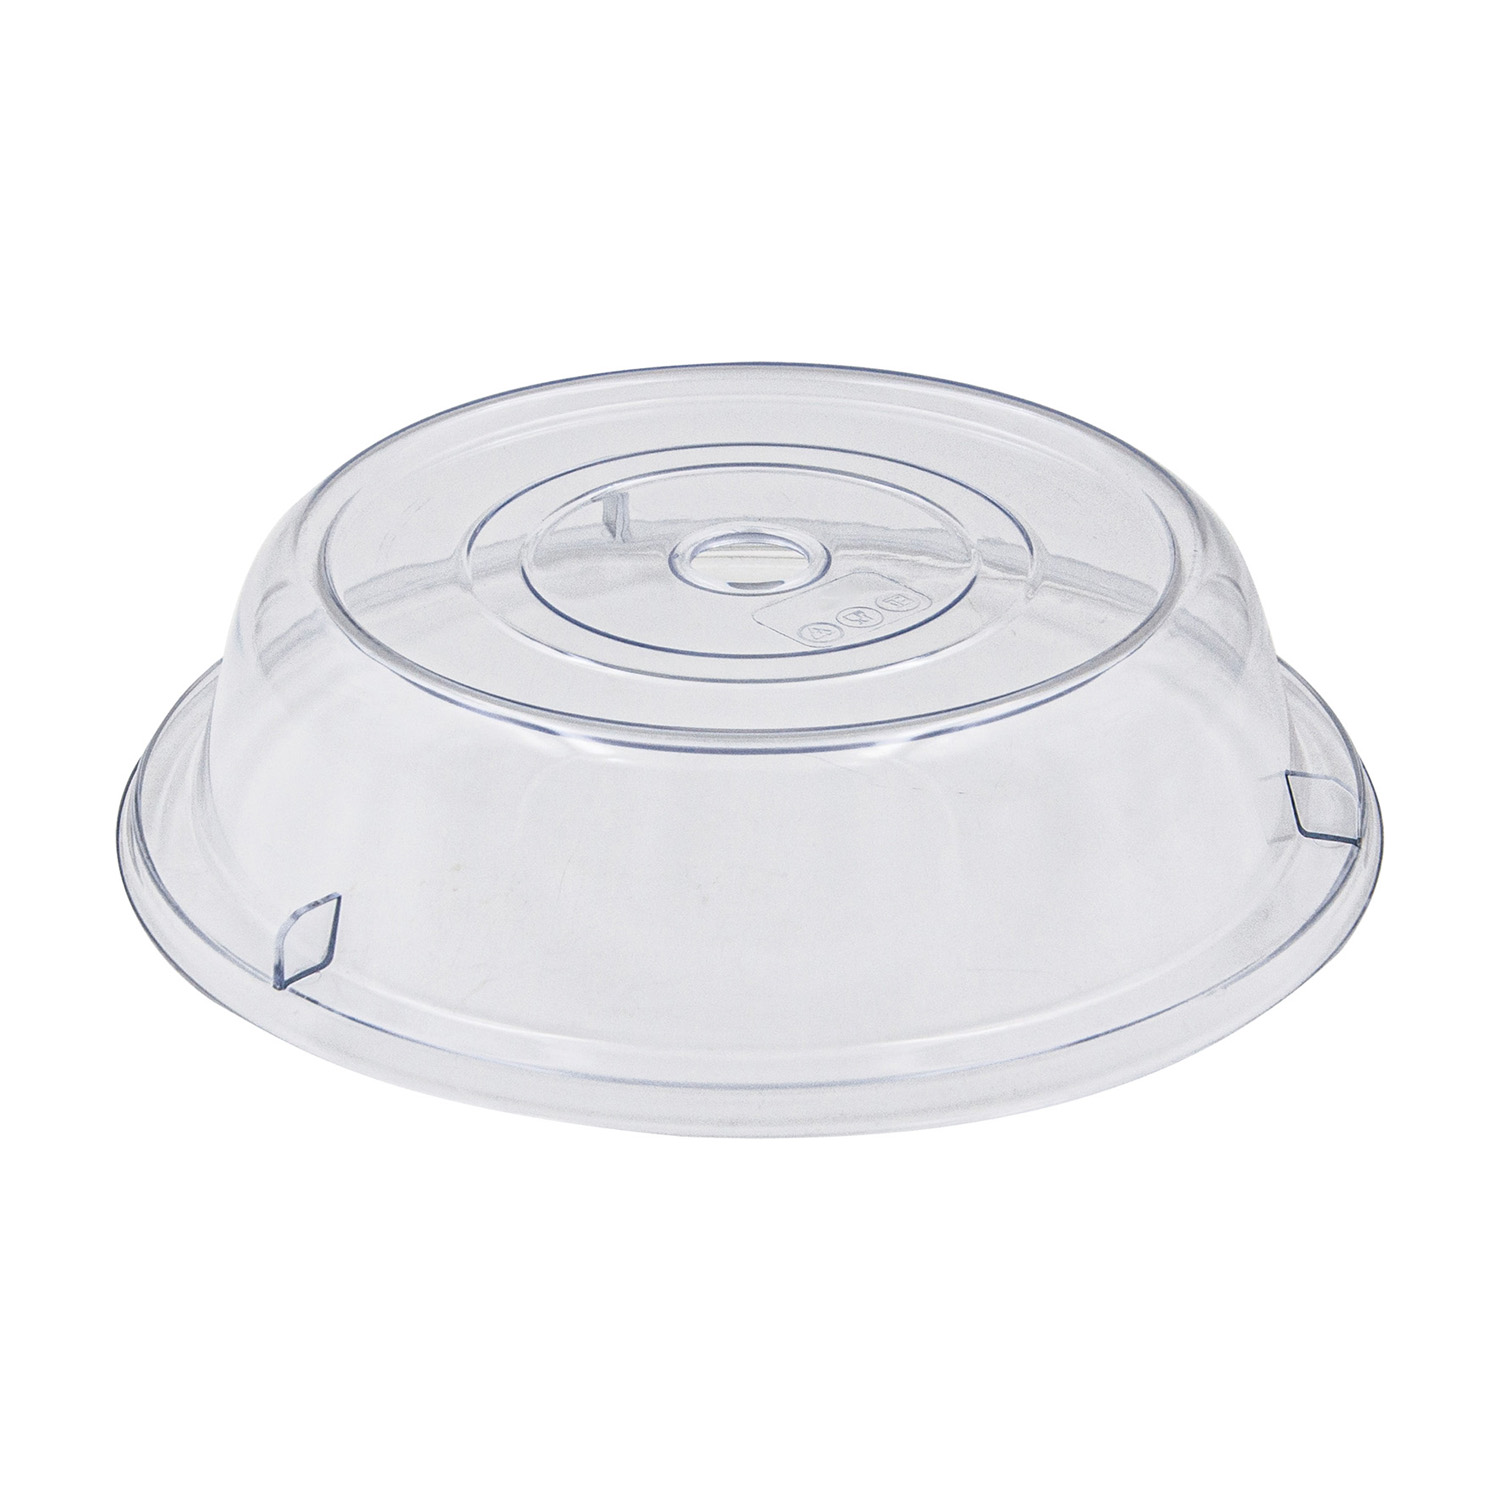 CAC China PPCO-25 Clear Polycarbonate Round Plate Cover 14"Dia